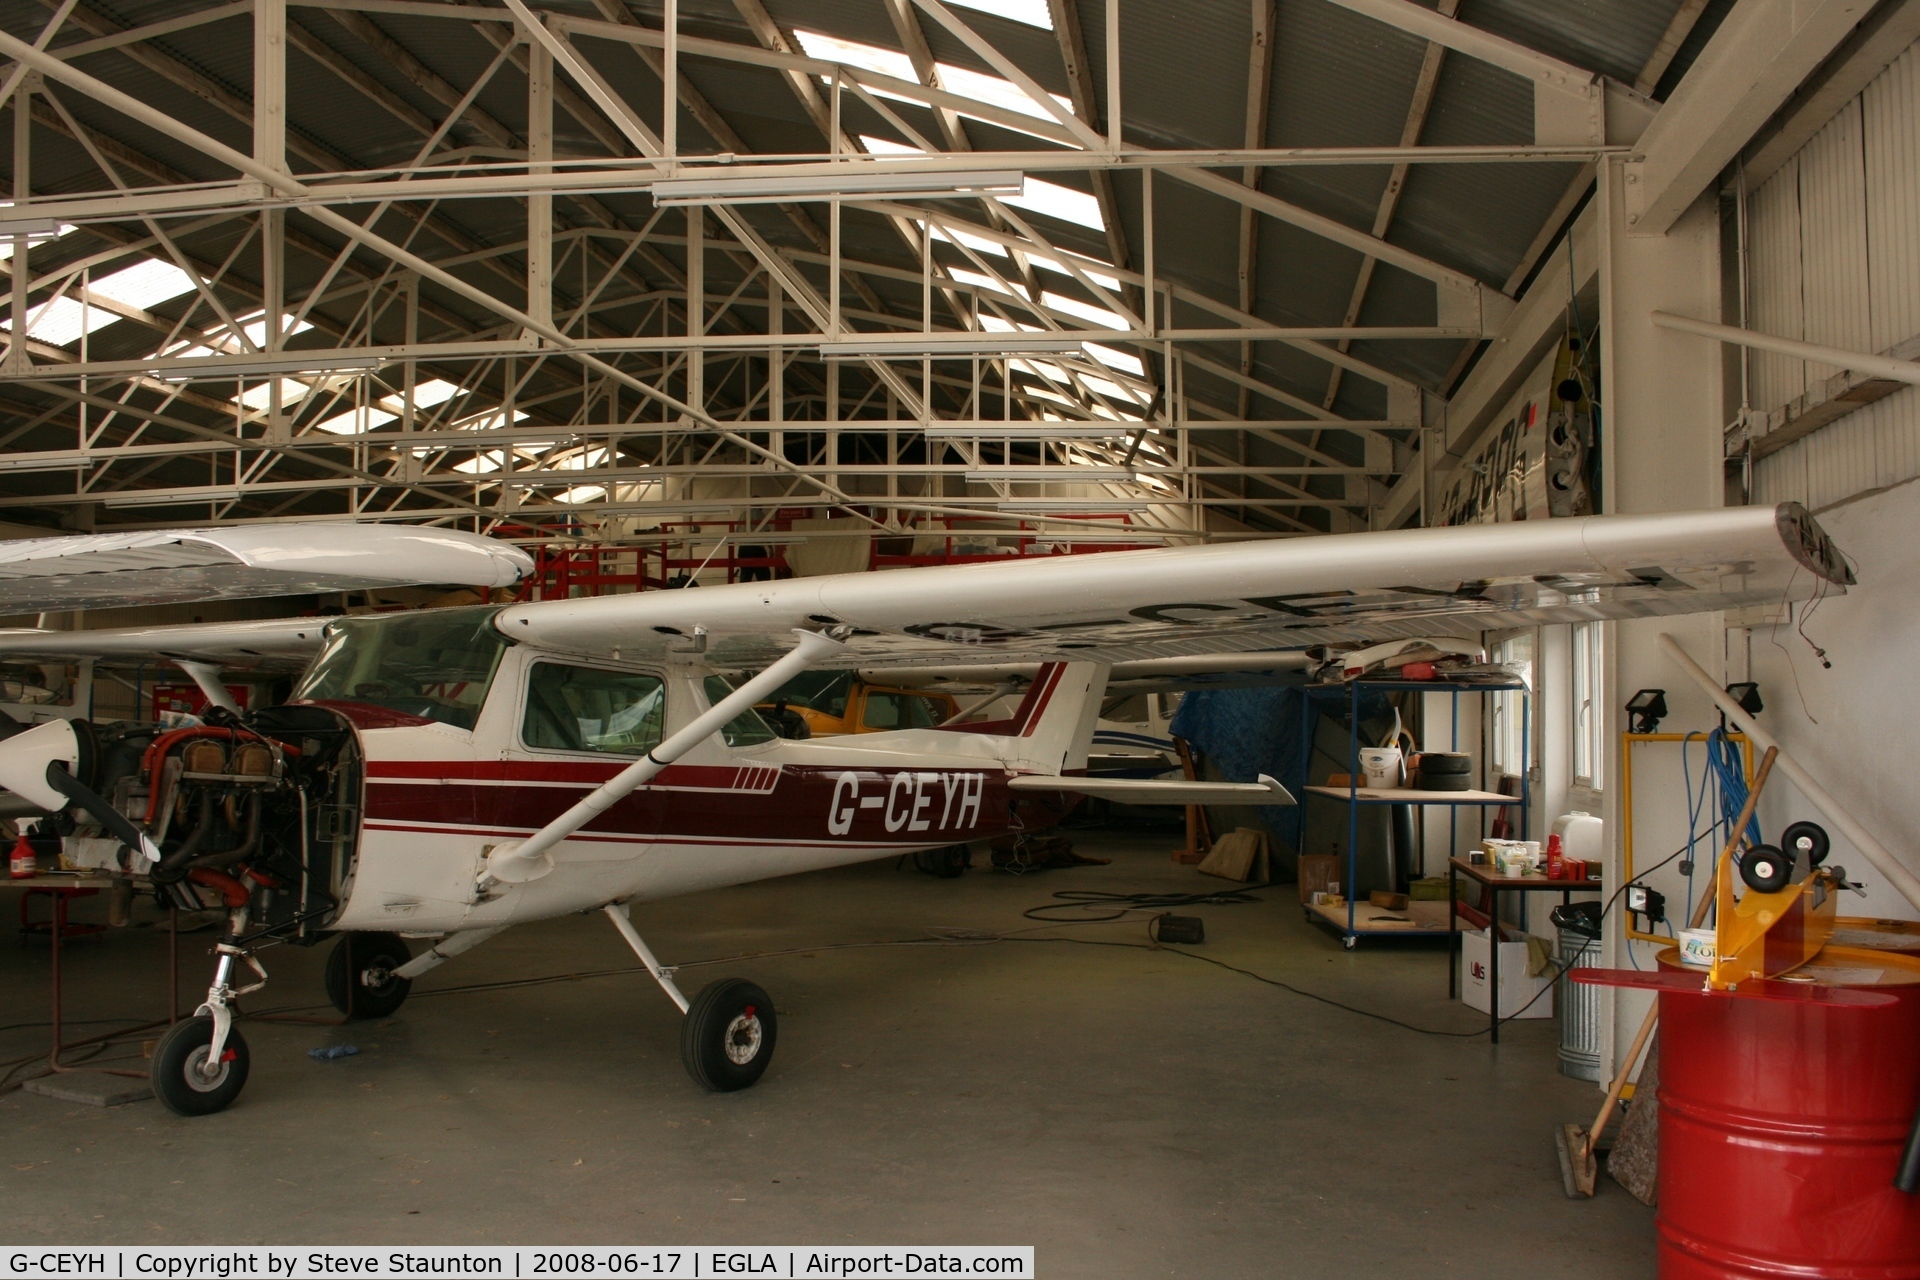 G-CEYH, 1978 Cessna 152 C/N 15282689, Taken at Bodmin Airfield, June 2008.